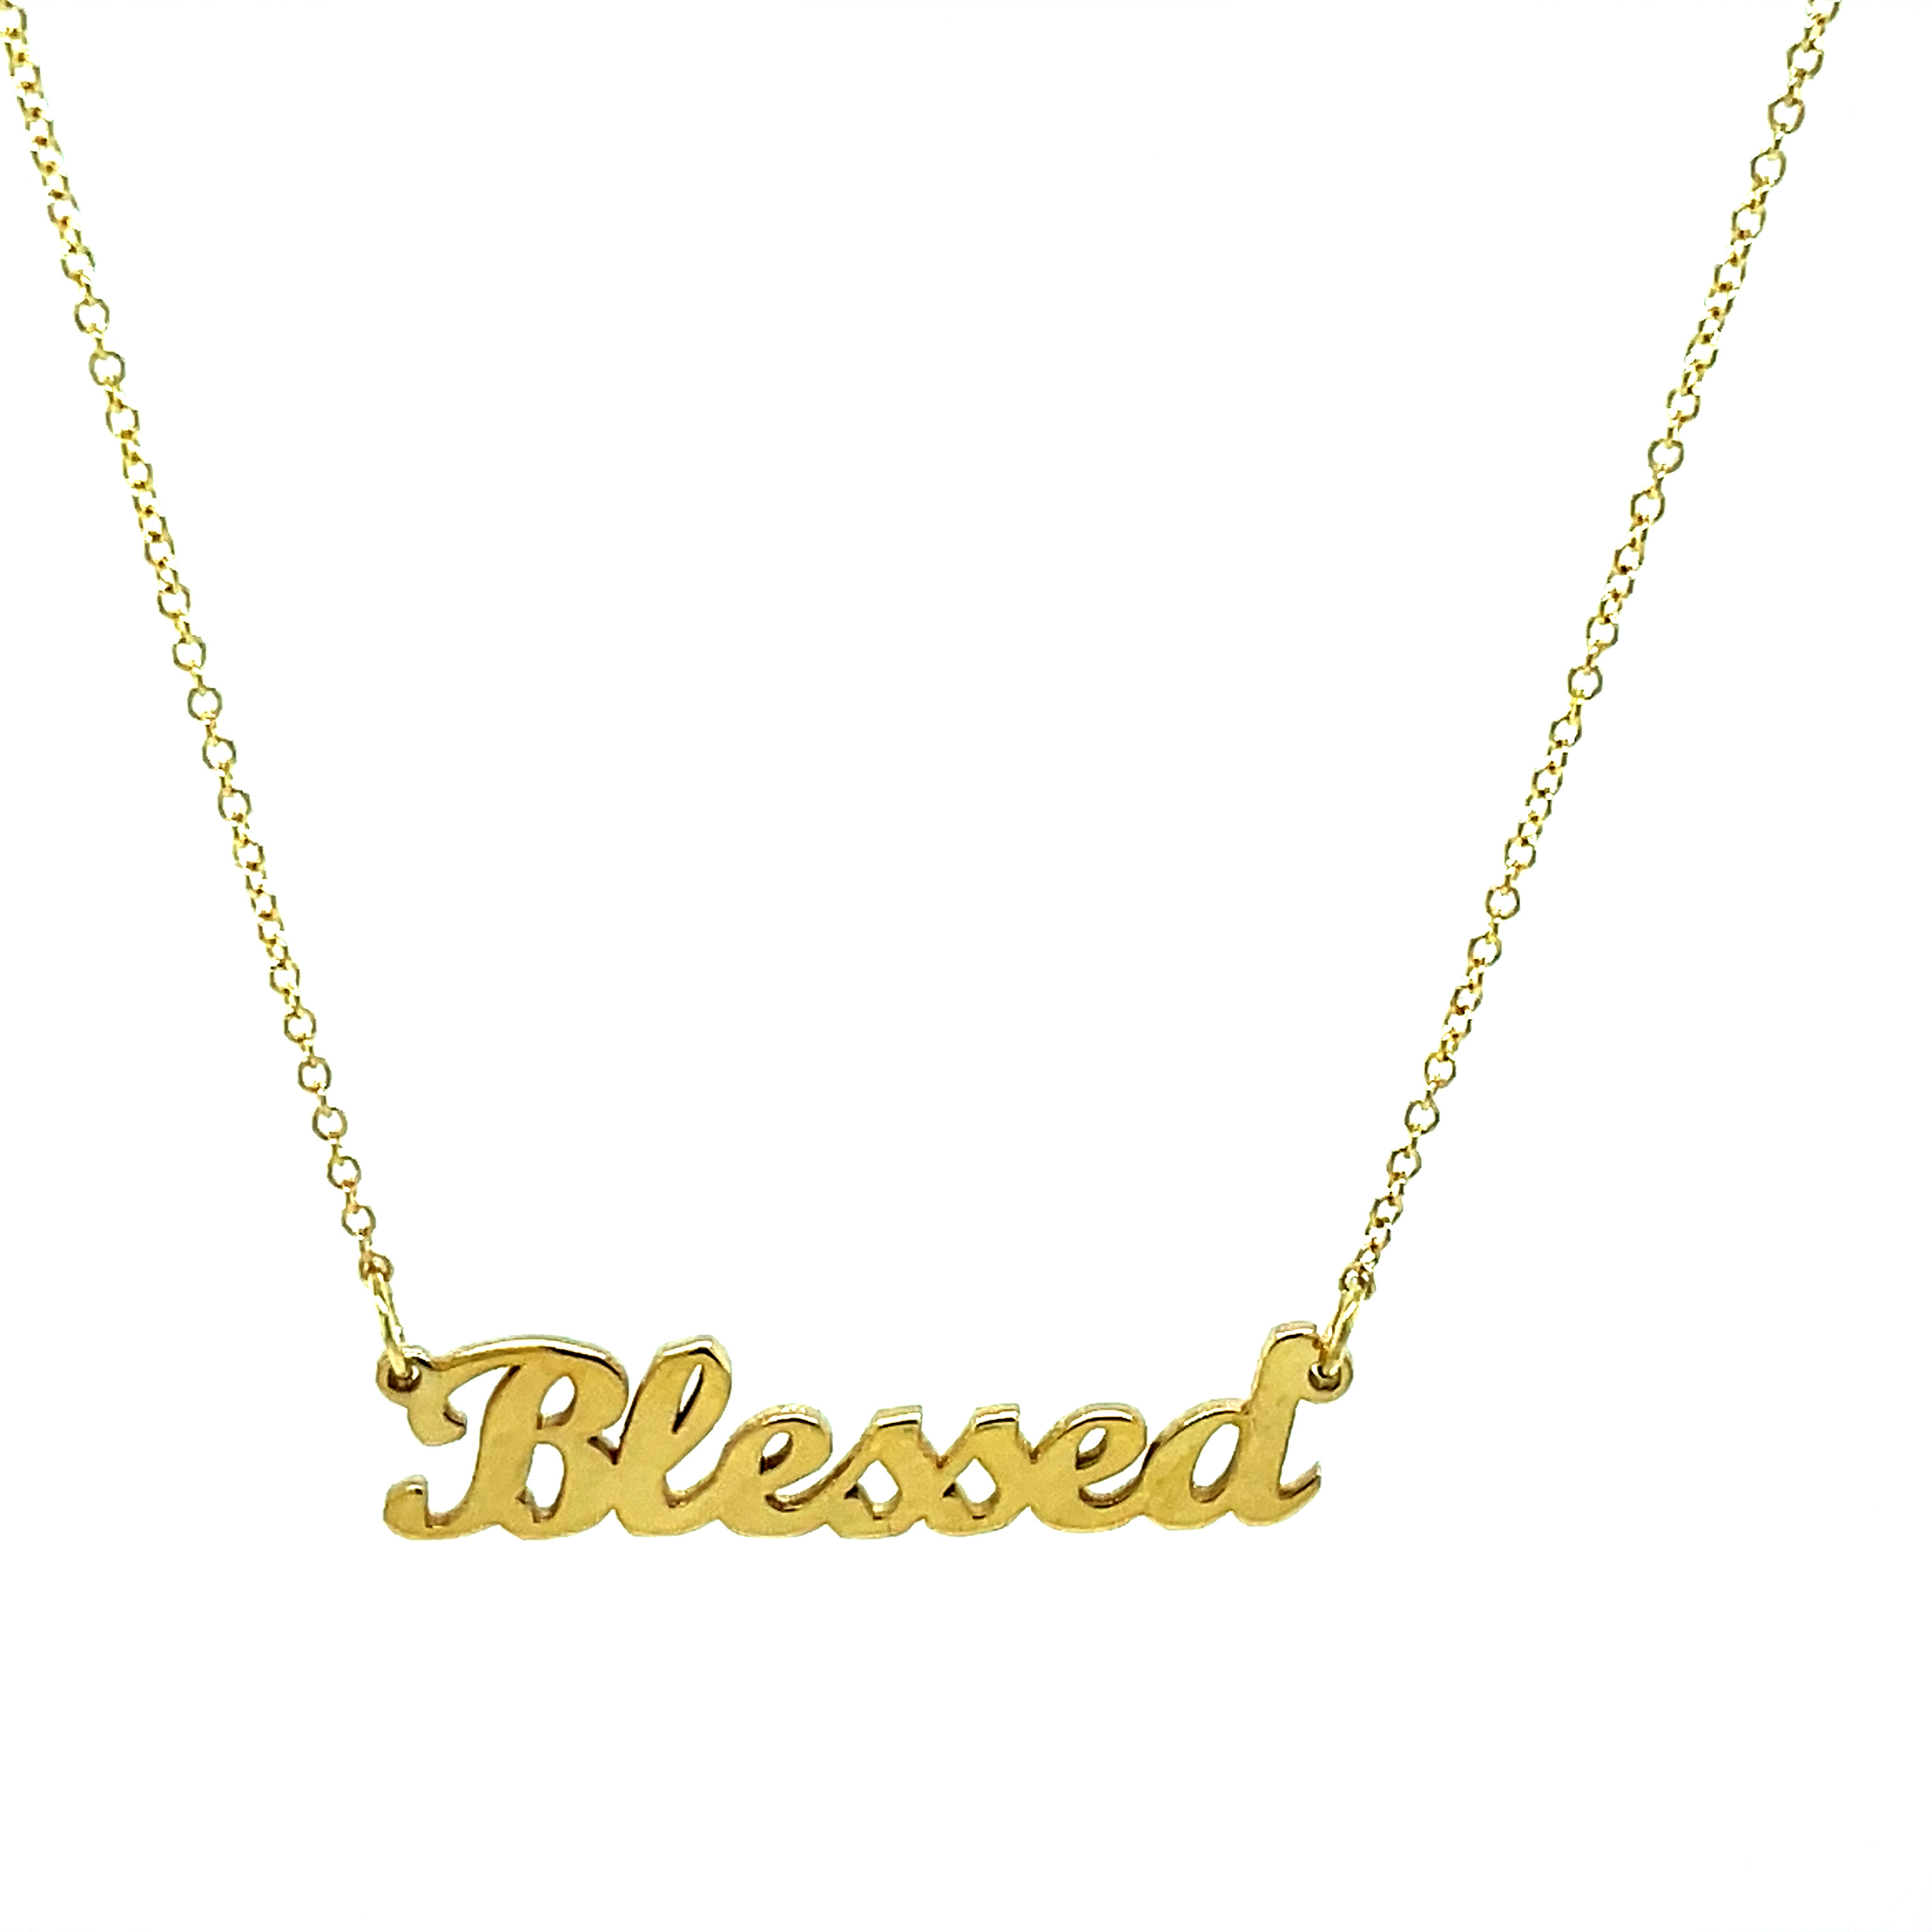 This 1” long, 14k-yellow-gold nameplate features a secure catch and 16” long chain with cursive font.